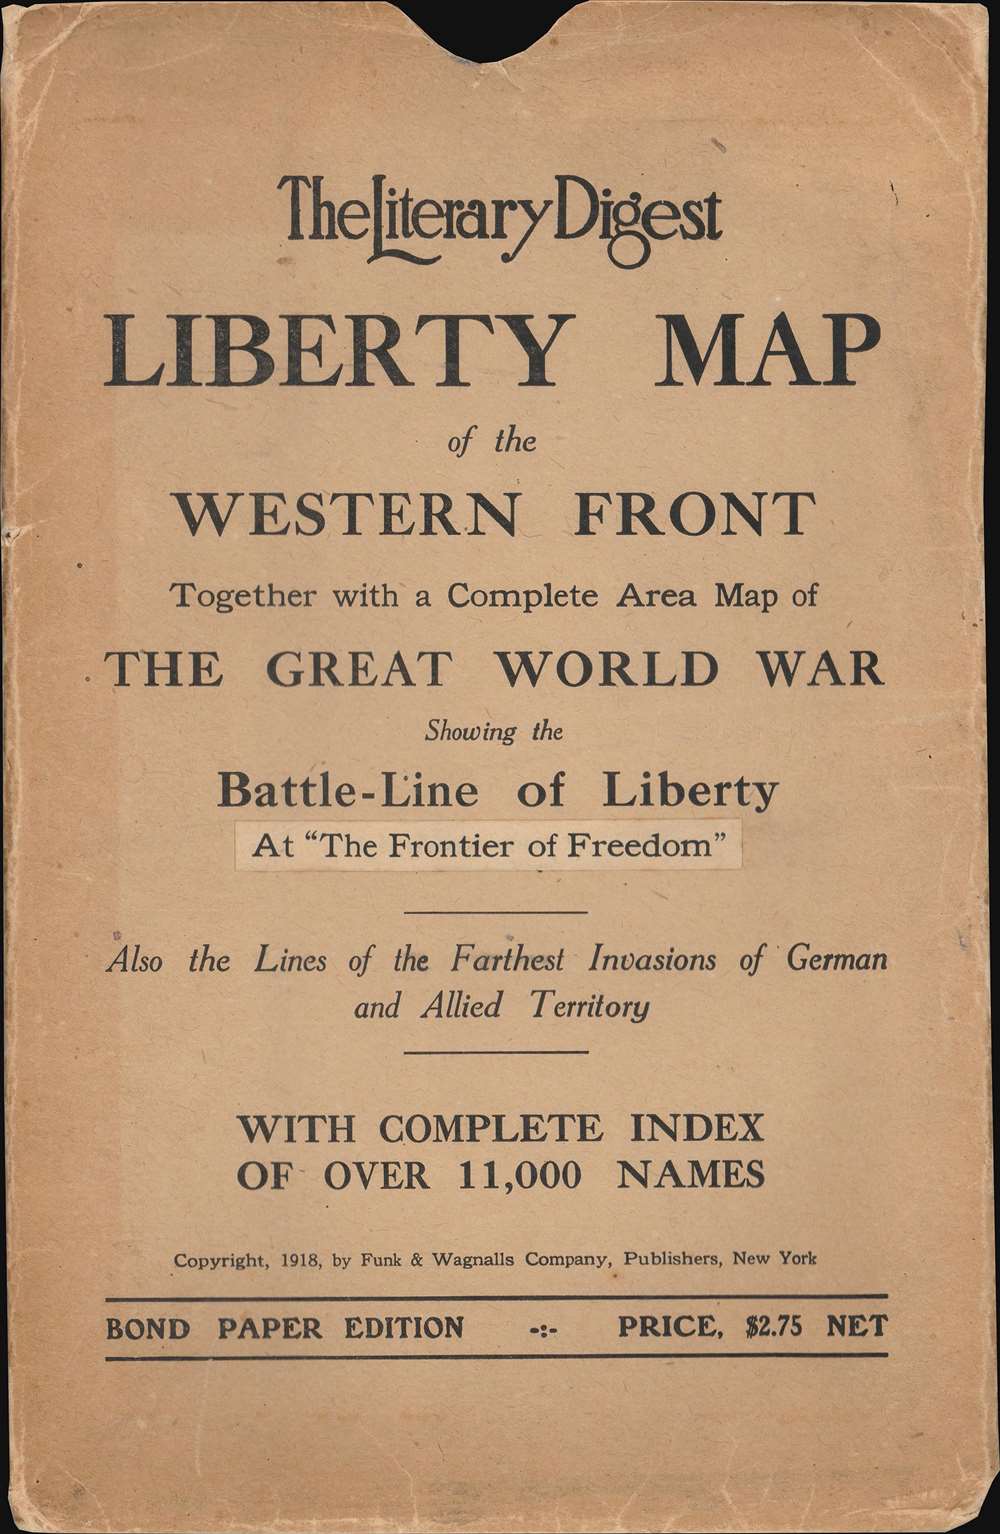 The Literary Digest Liberty Map of the Western Front of the Great World War Showing the Battle Line of Liberty as it Stood June 5, 1918. - Alternate View 3